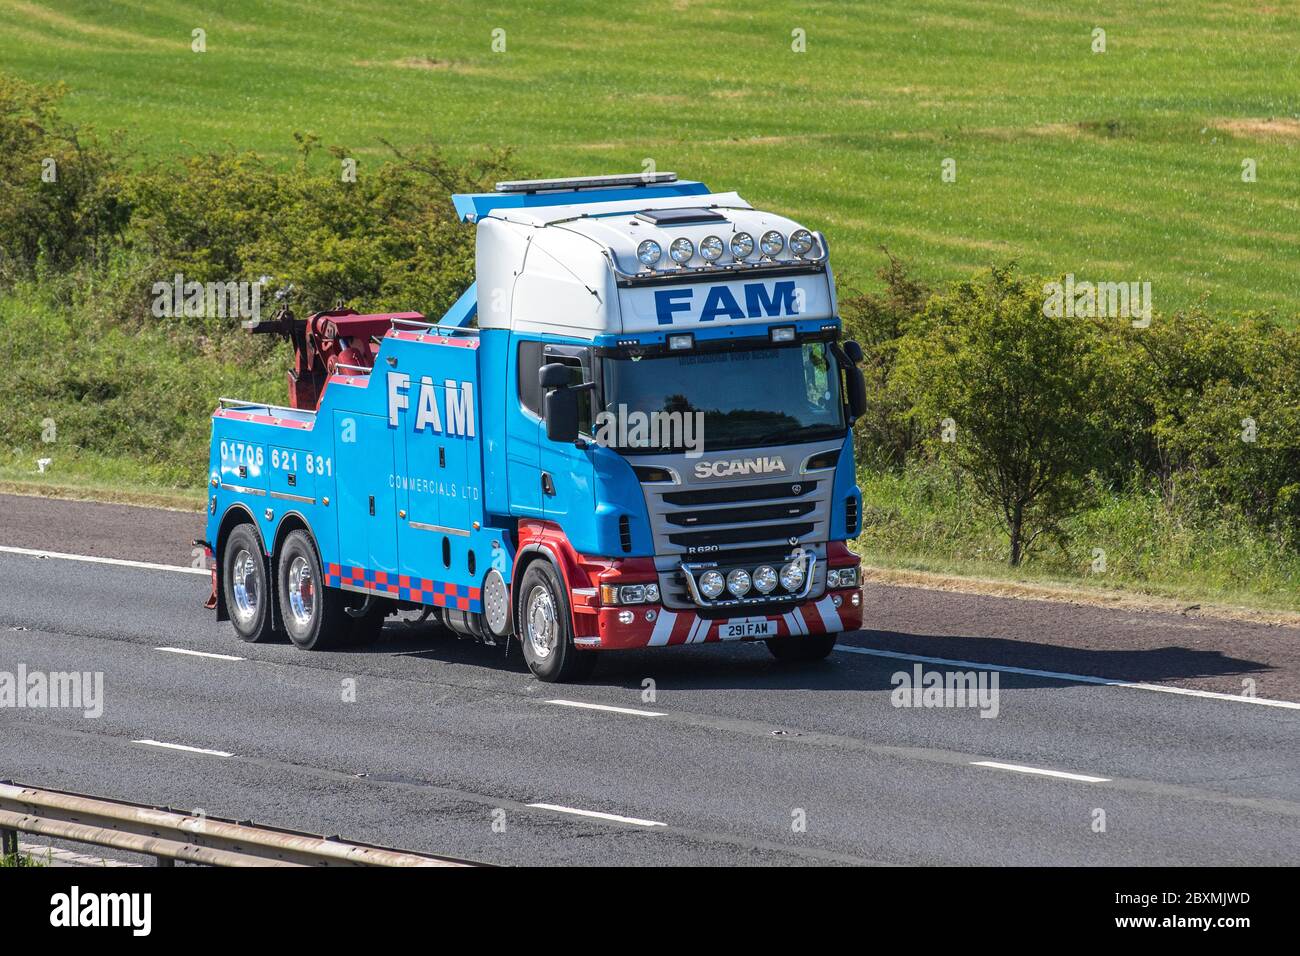 FAM Commercials Ltd; Haulage delivery trucks, lorry, transportation, truck, cargo carrier, Scania R620 vehicle, European commercial transport industry HGV, M6 at Manchester, UK Stock Photo